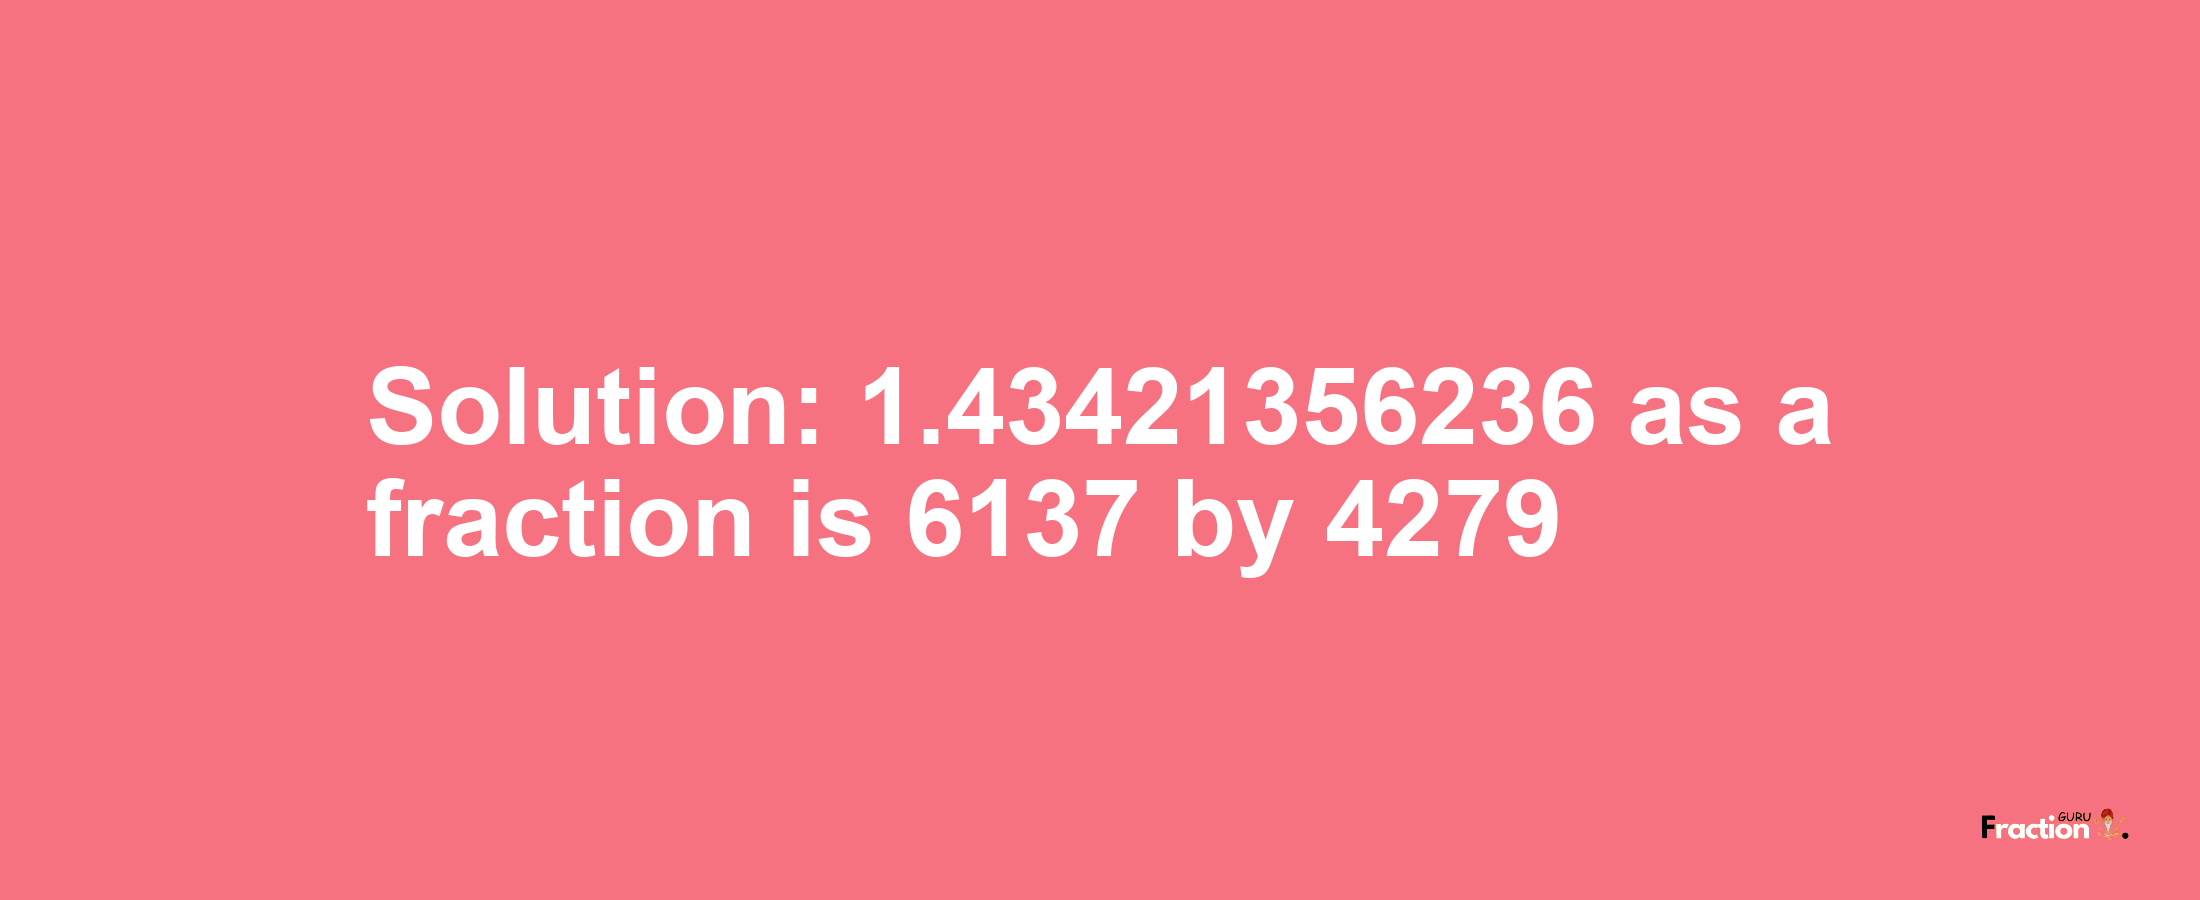 Solution:1.43421356236 as a fraction is 6137/4279